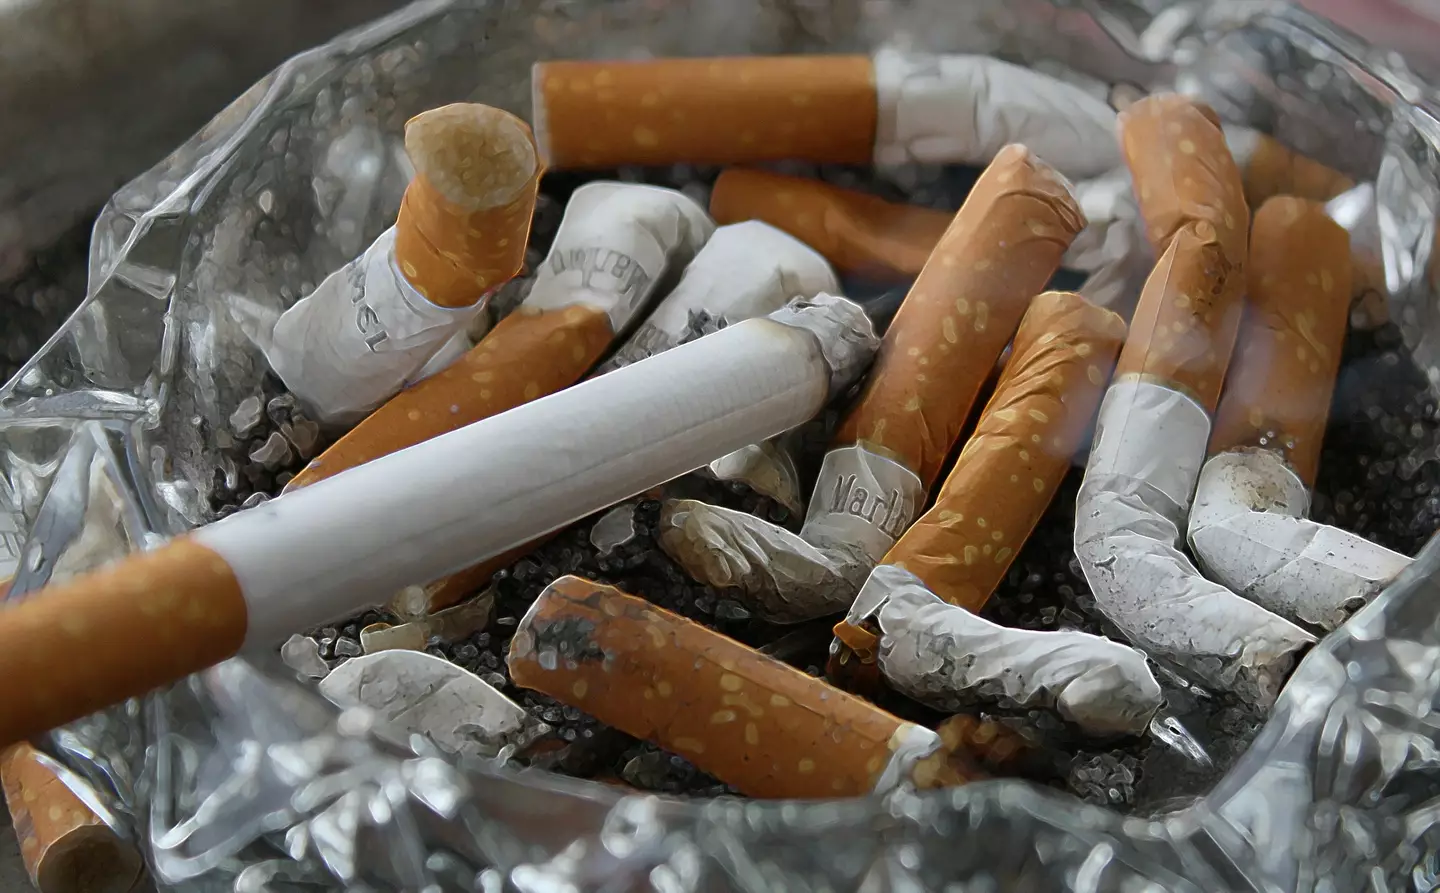 The council is proposing an incentive scheme to encourage people to stop smoking.